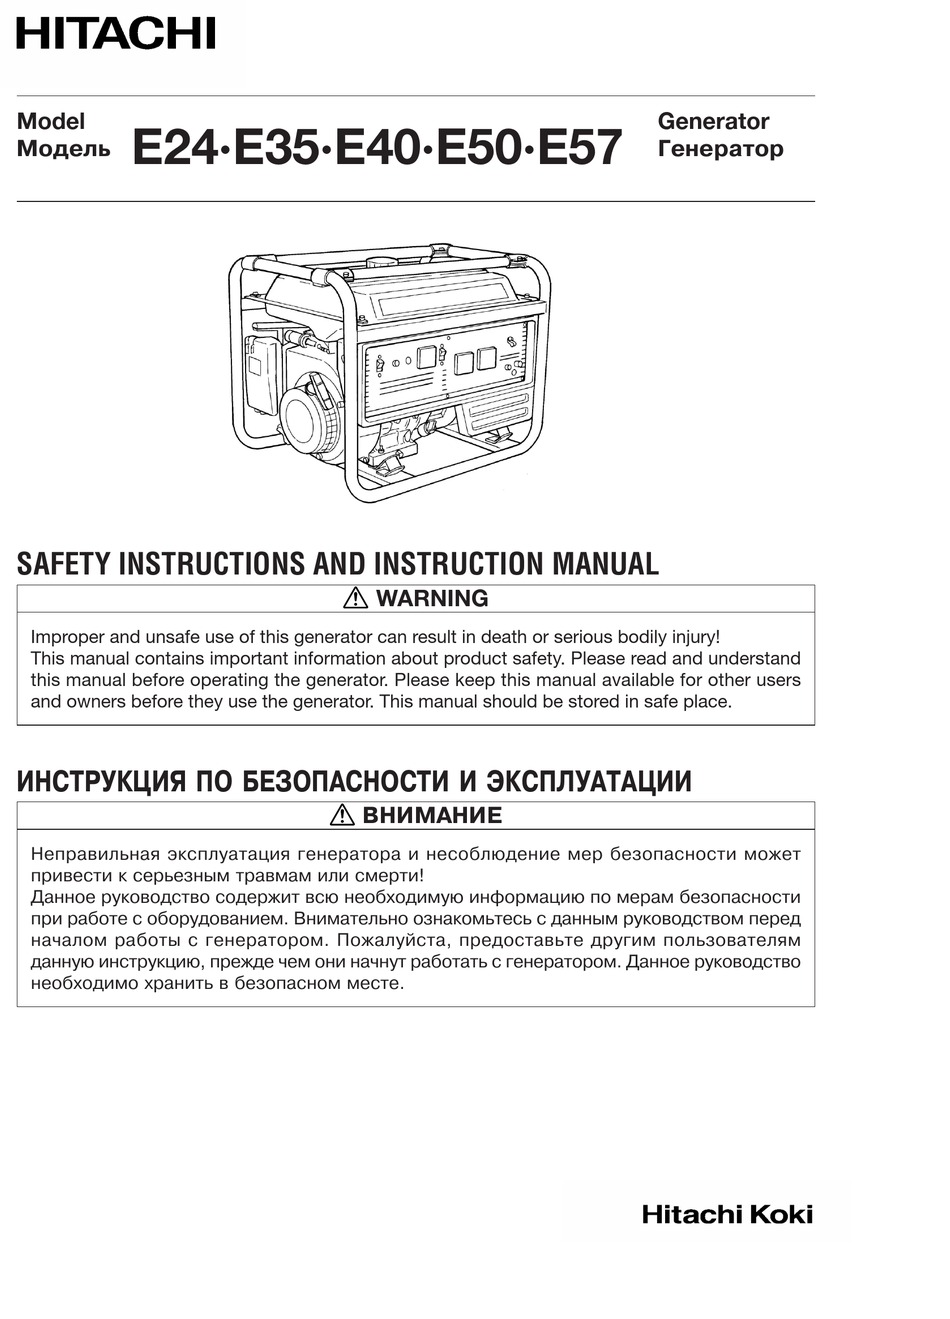 HITACHI E24 SAFETY INSTRUCTIONS AND INSTRUCTION MANUAL Pdf Download .